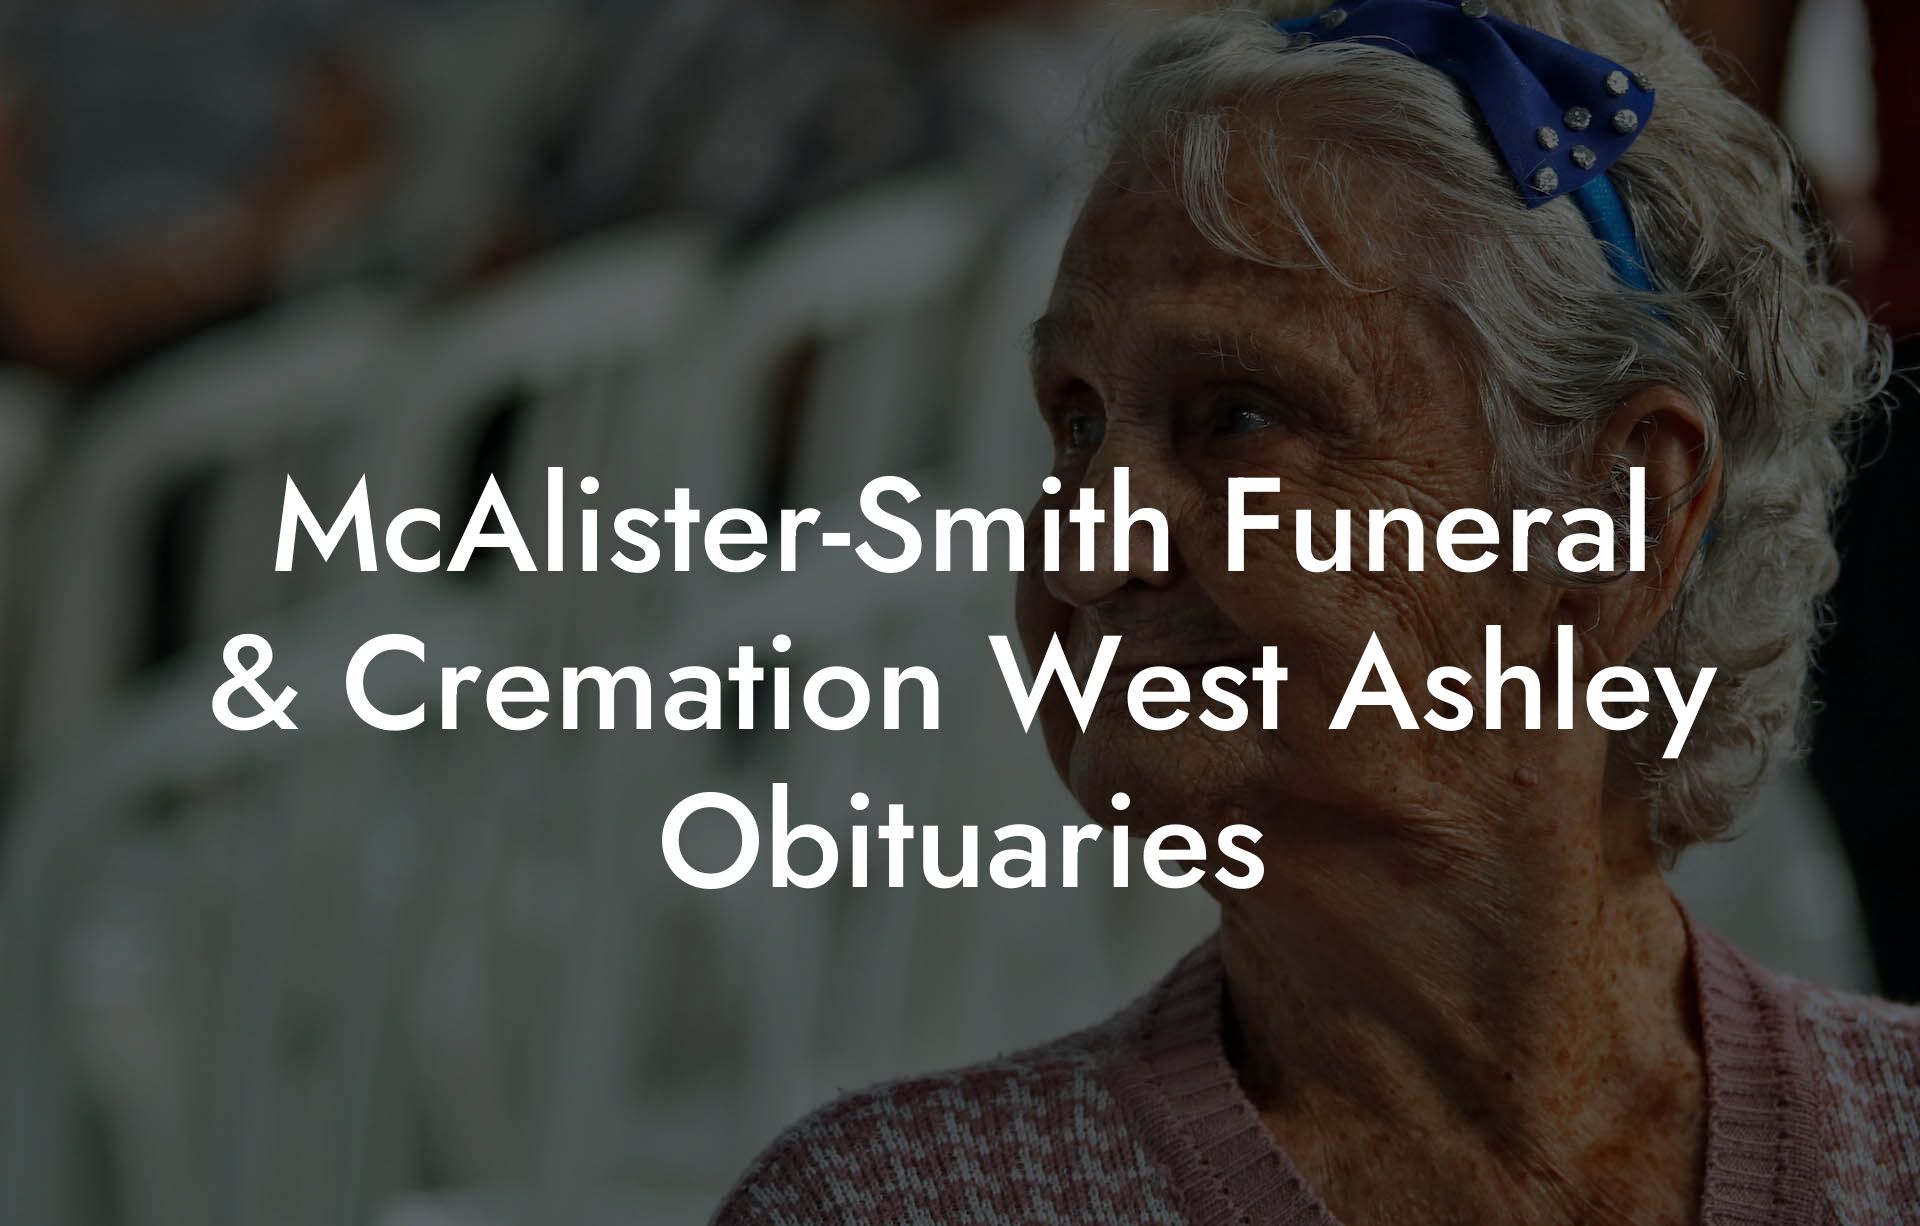 McAlister-Smith Funeral & Cremation West Ashley Obituaries